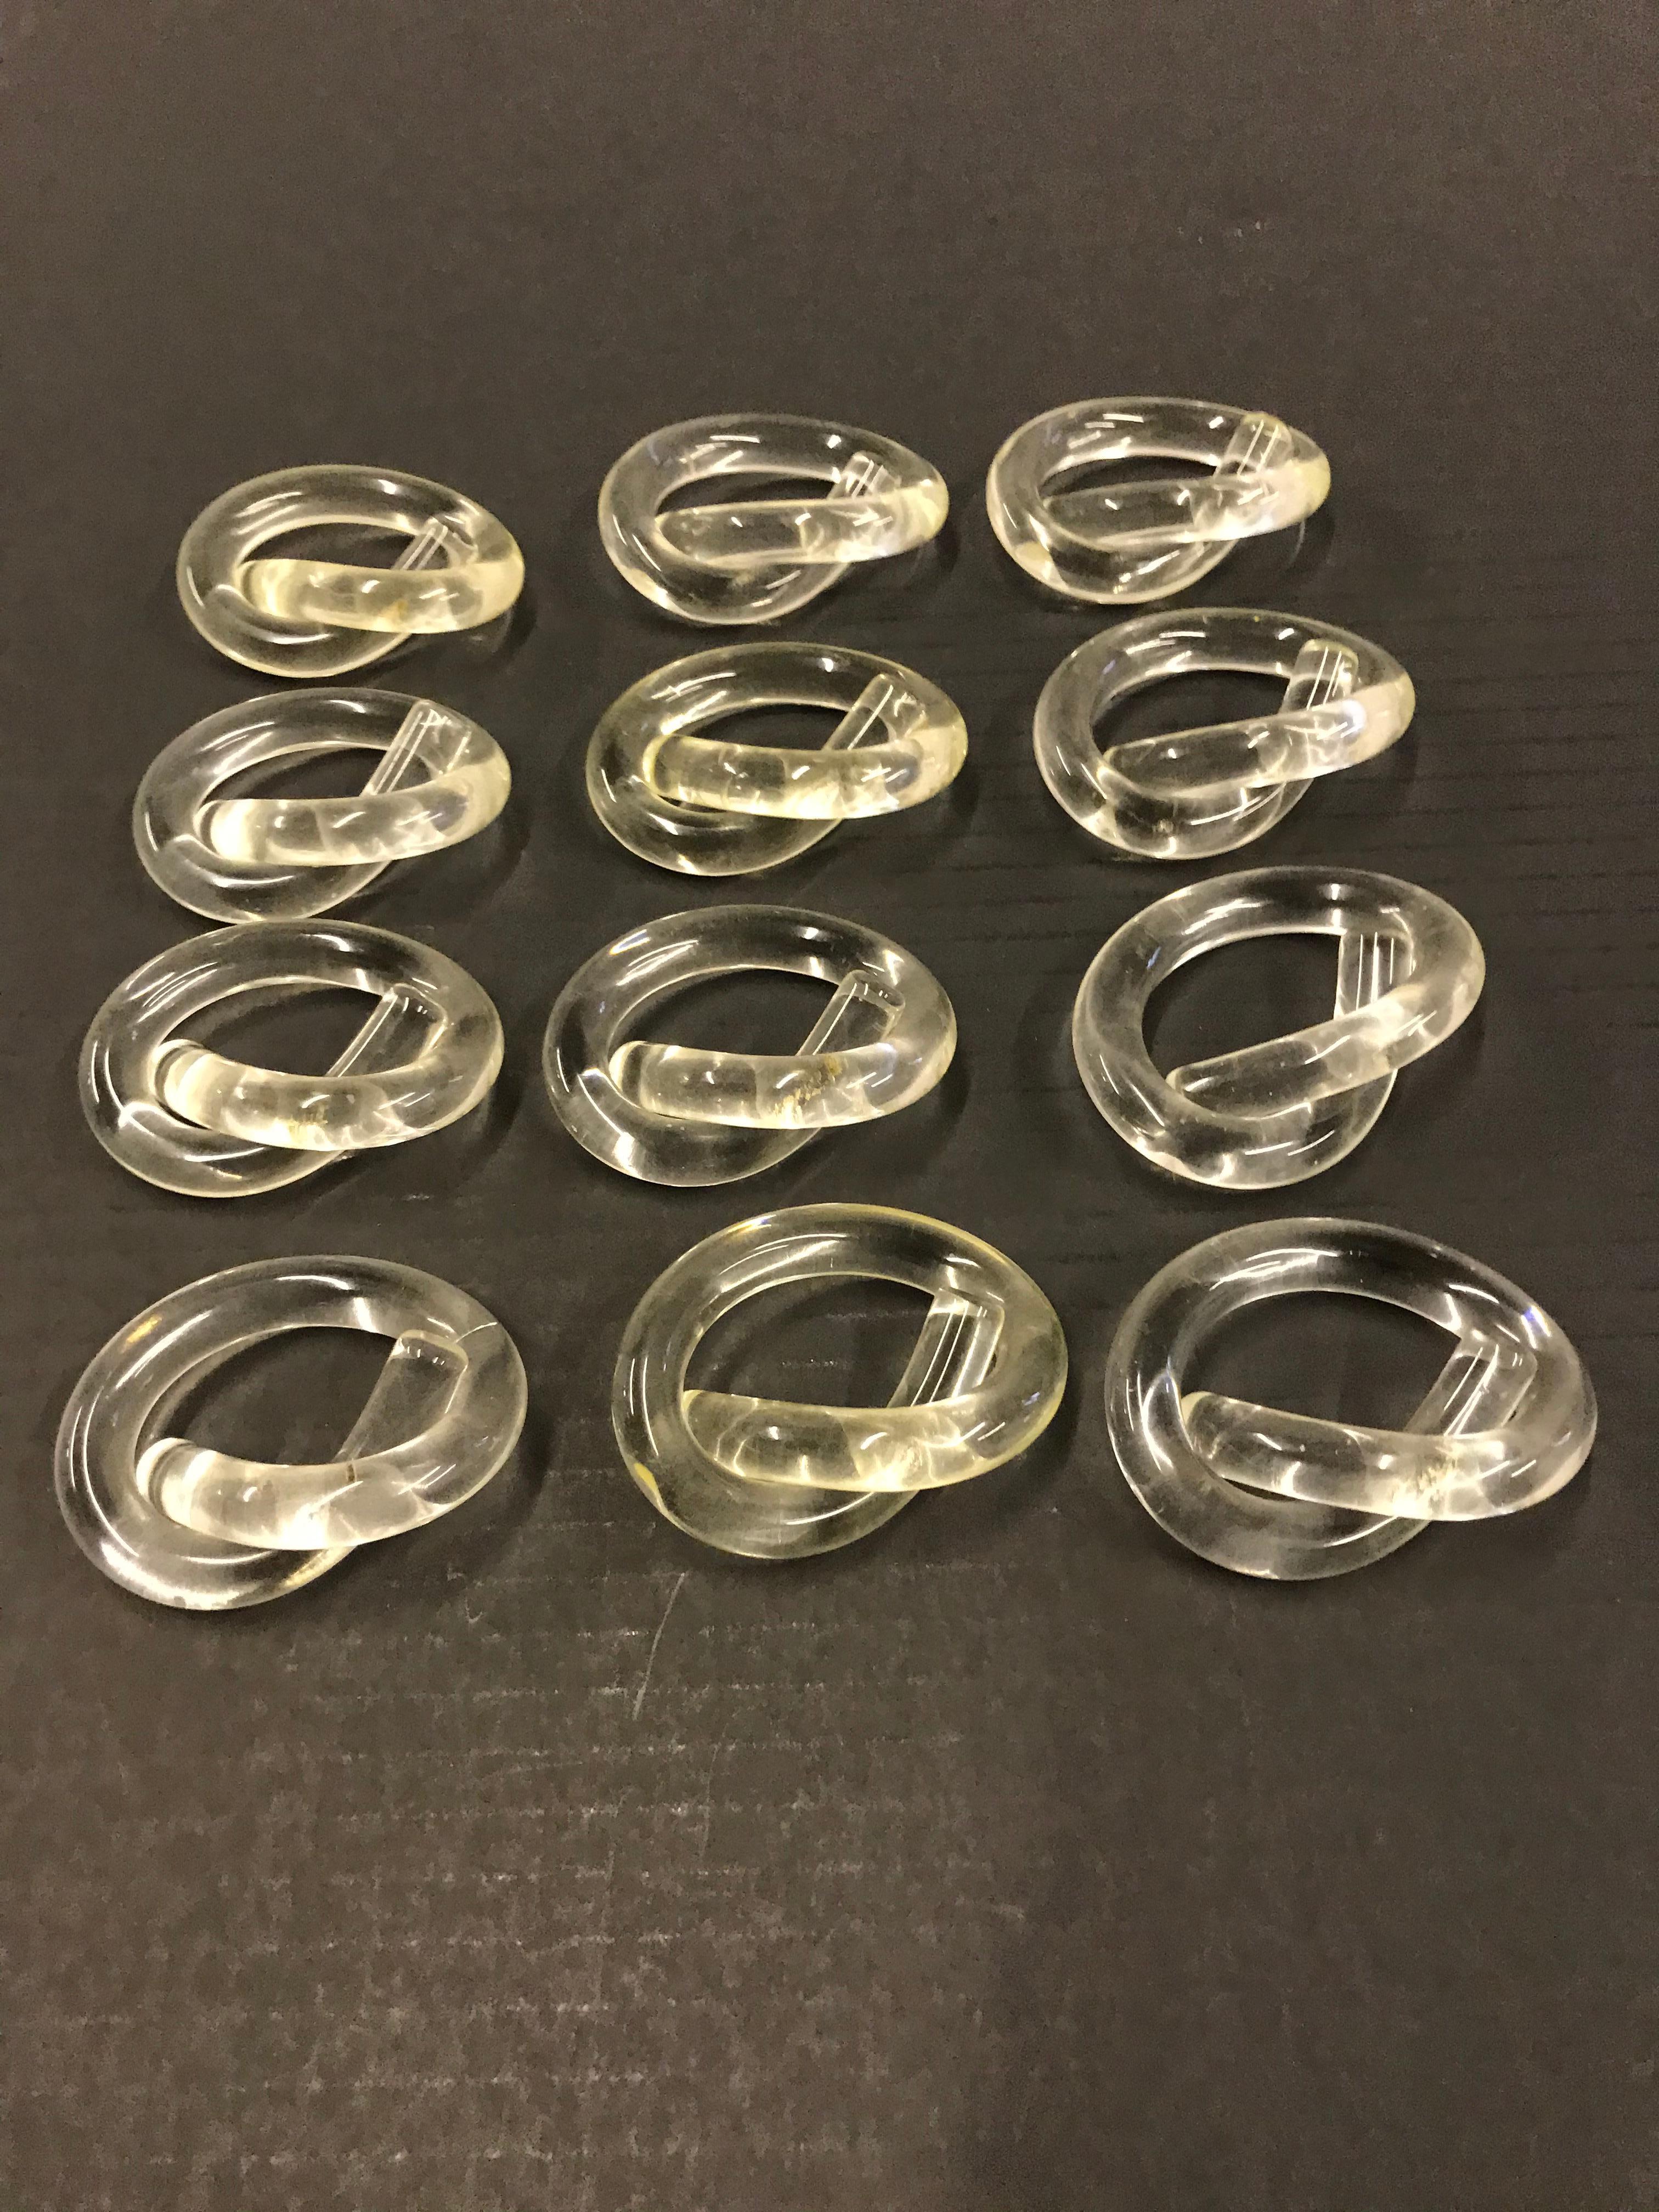 Dorothy Thorpe, a Mid-Century Modern icon and prolific artist, designed mostly for the table and here are 12 of her Lucite Napkin rings in the Pretzel form with a Lucite holder.
Measurements: Napkin rings 2 7/8 inches x 1 1/4 inches. Holder: Base 3